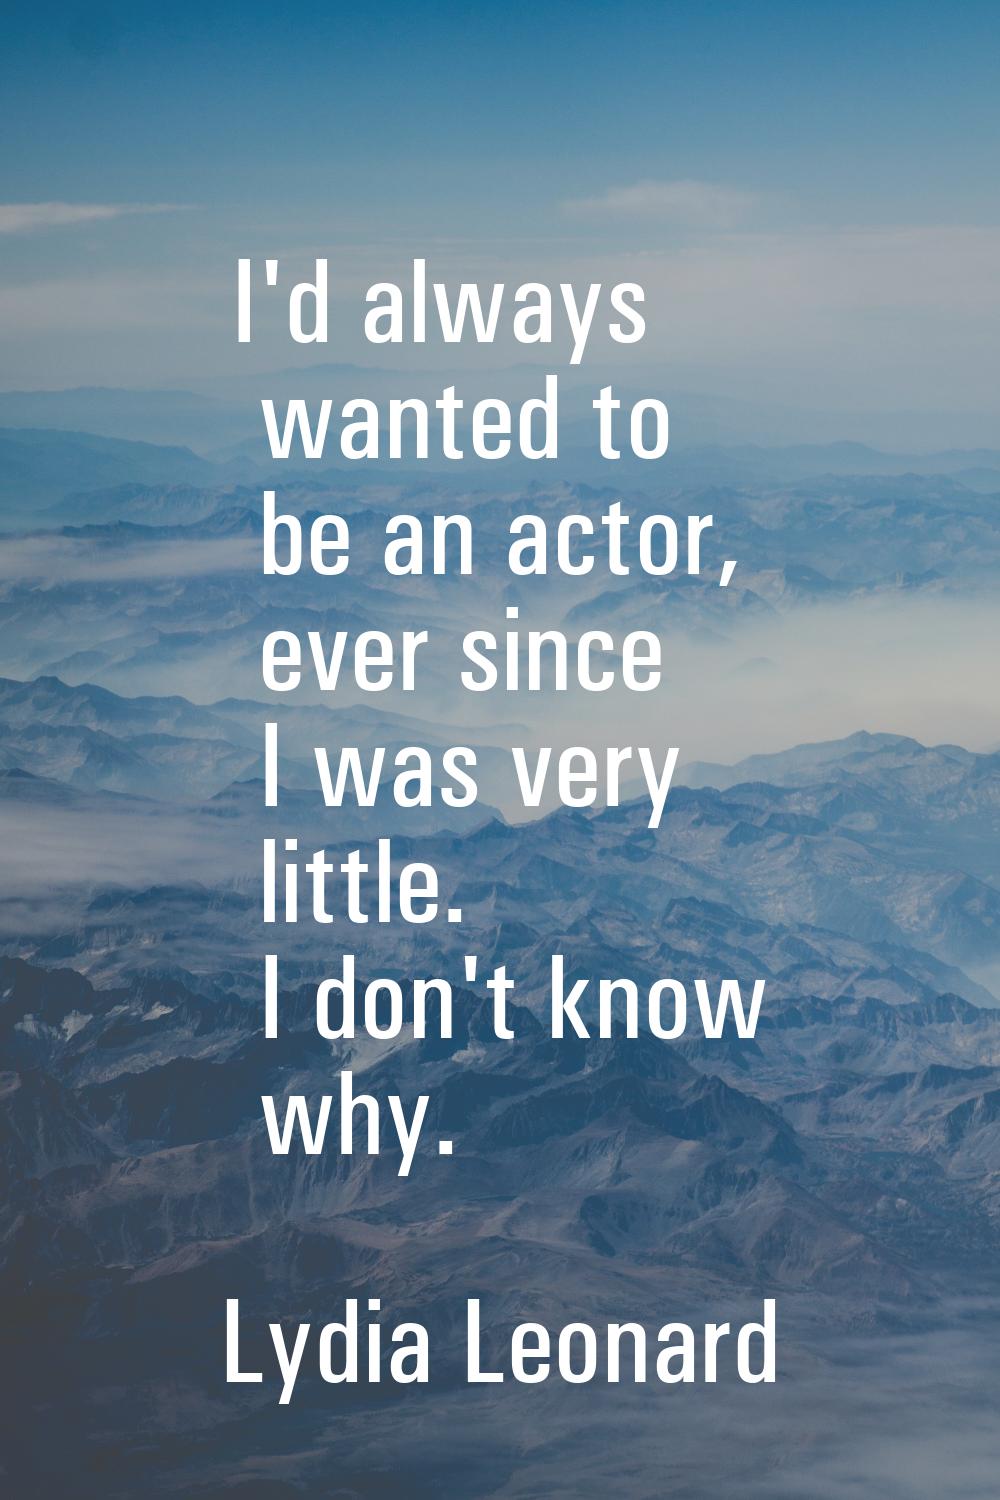 I'd always wanted to be an actor, ever since I was very little. I don't know why.